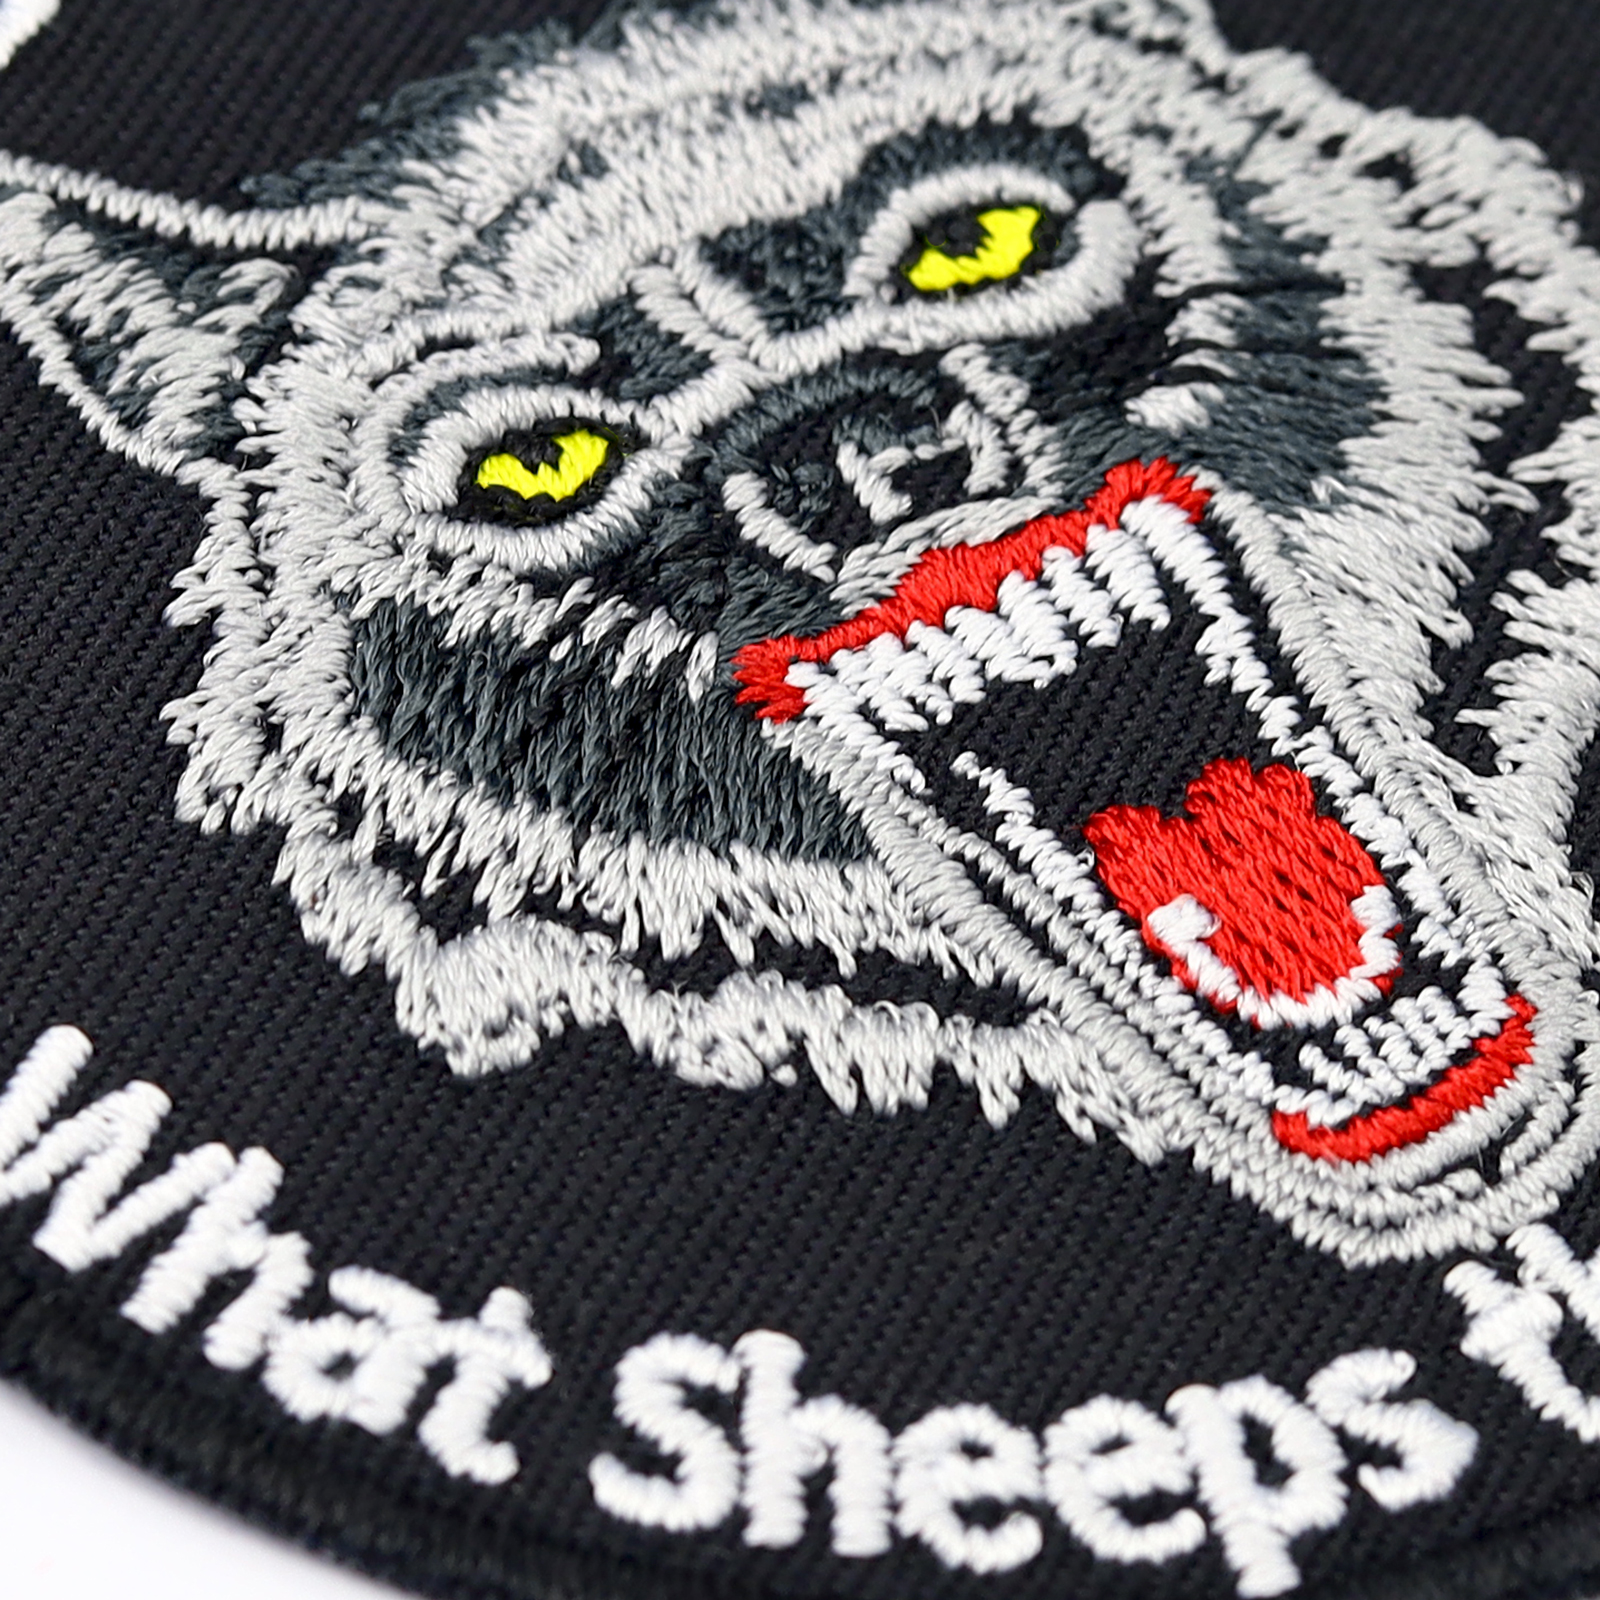 A wolf does not care what sheeps think about him - Patch